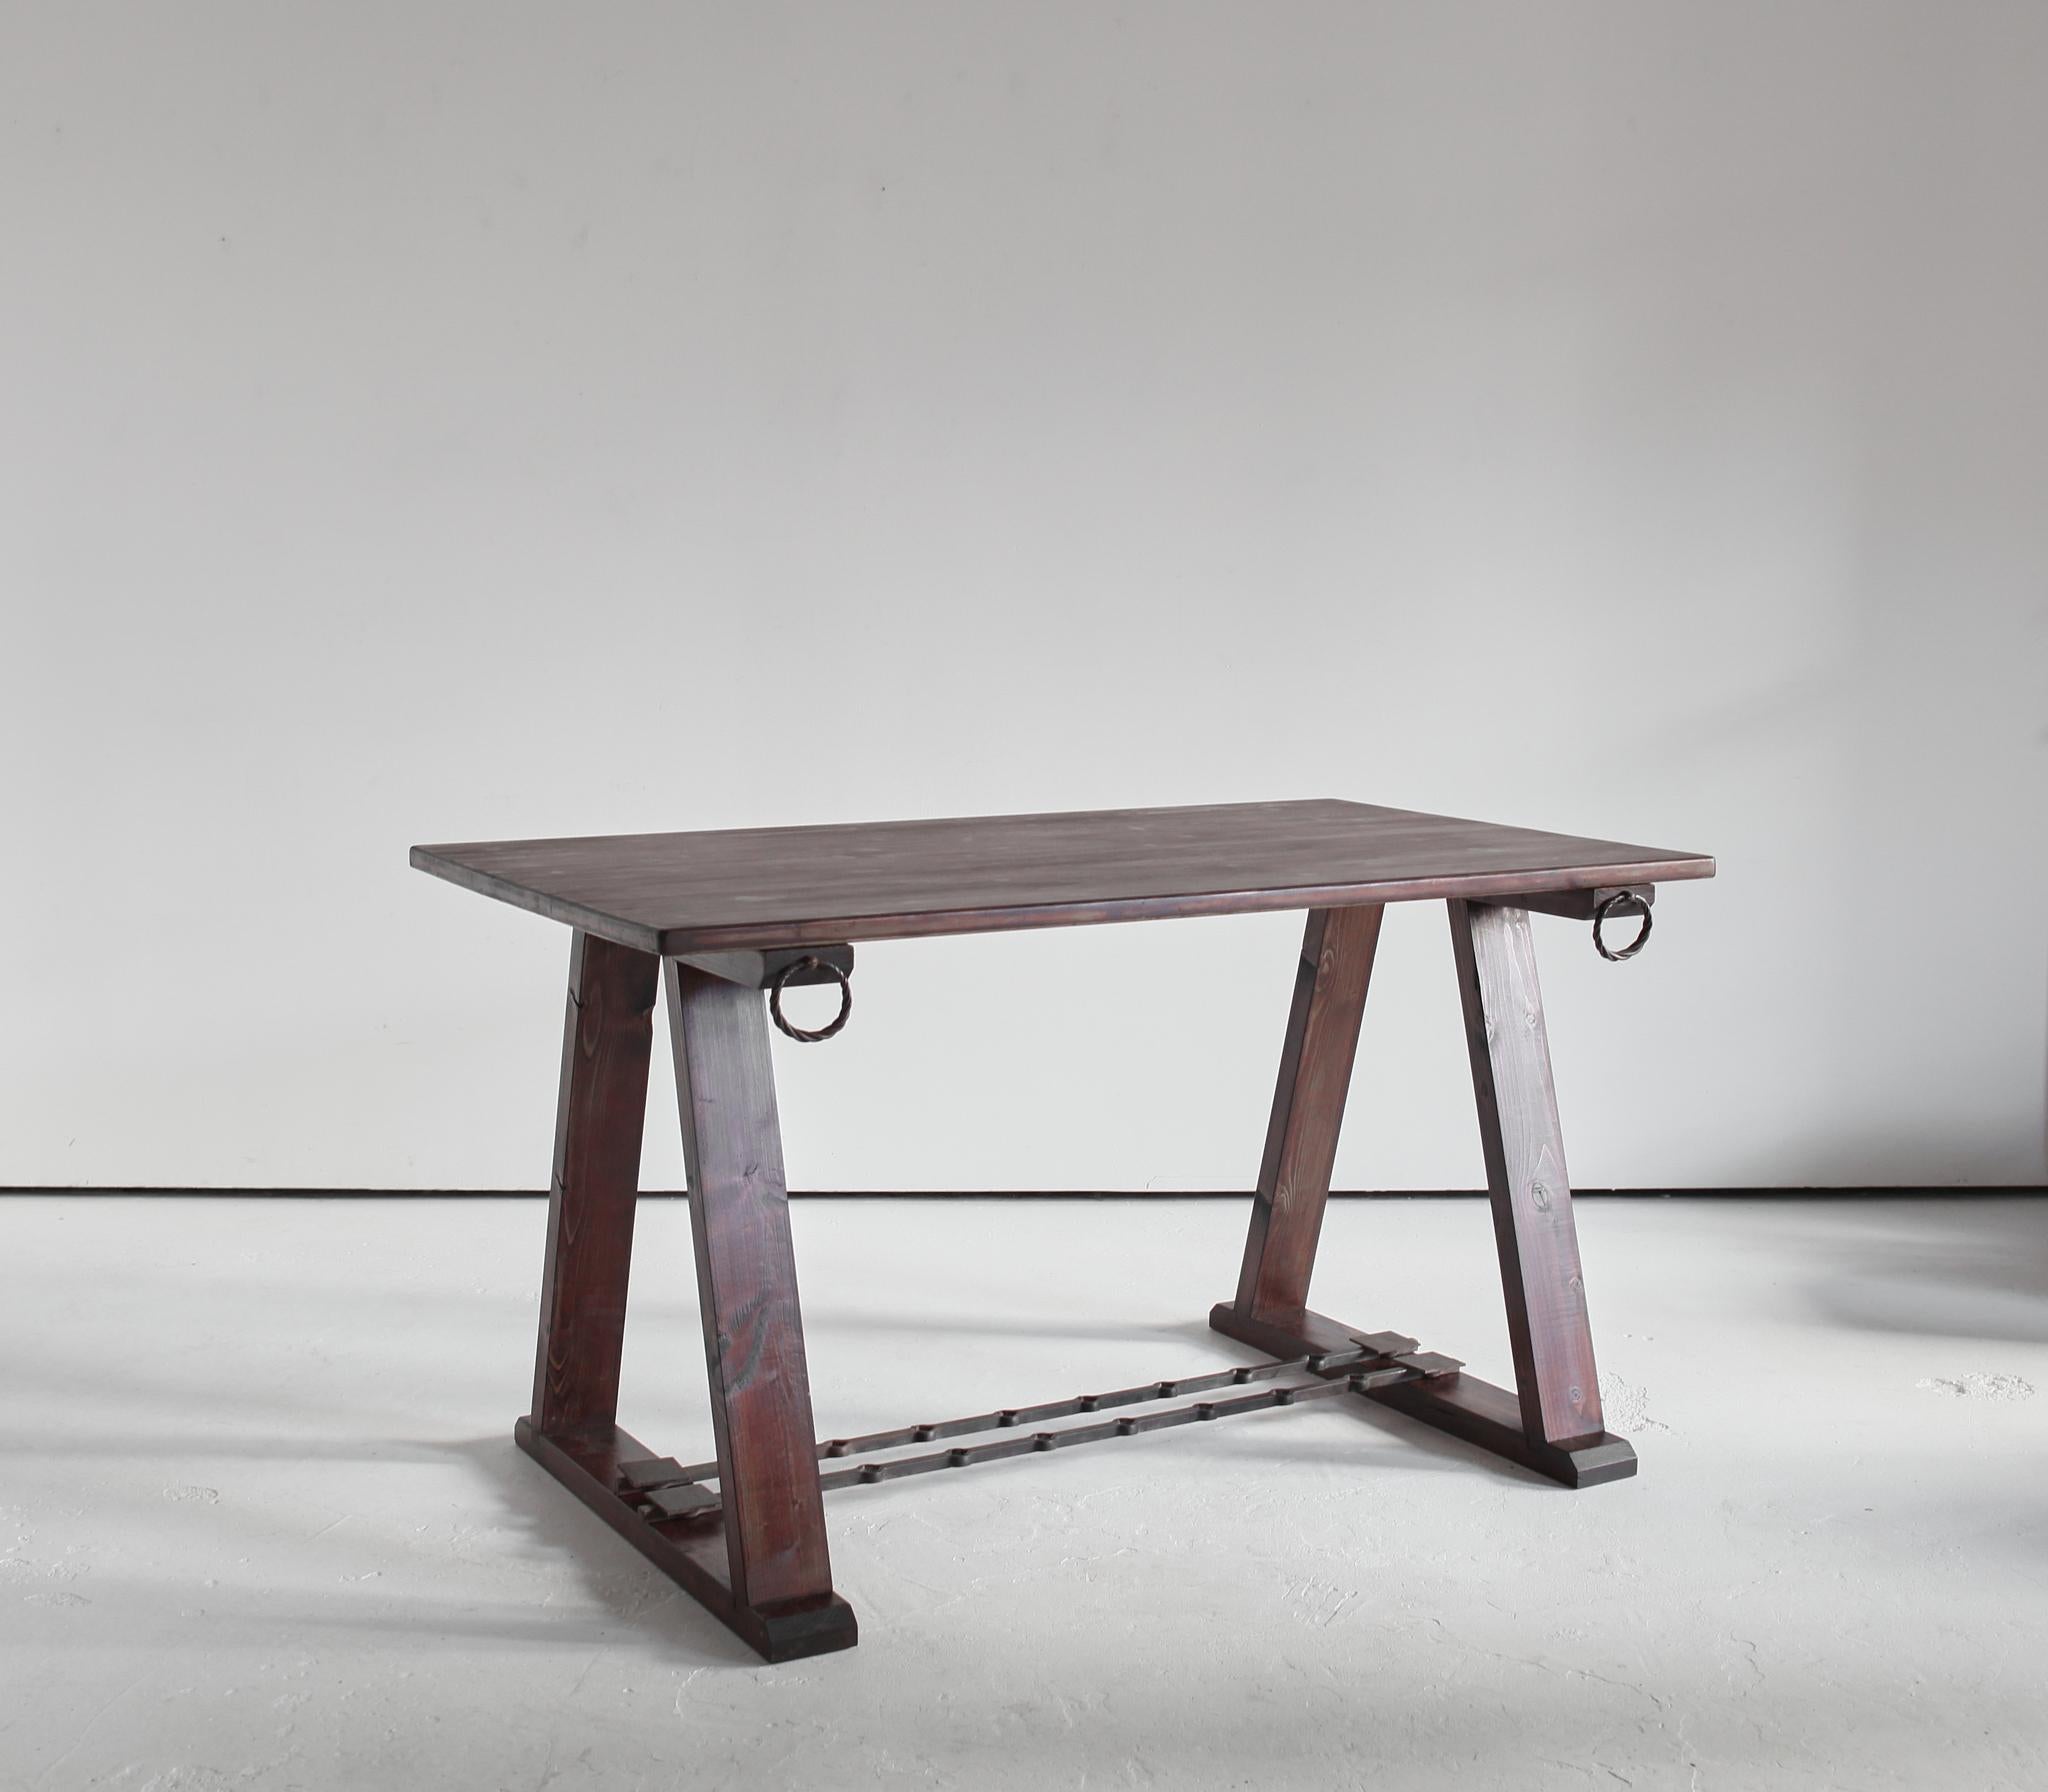 A C.1960s modernist alpine table from the Savoie region of France.

Simple trestle  construction with decorative artisanal ironwork stretcher and hardware.